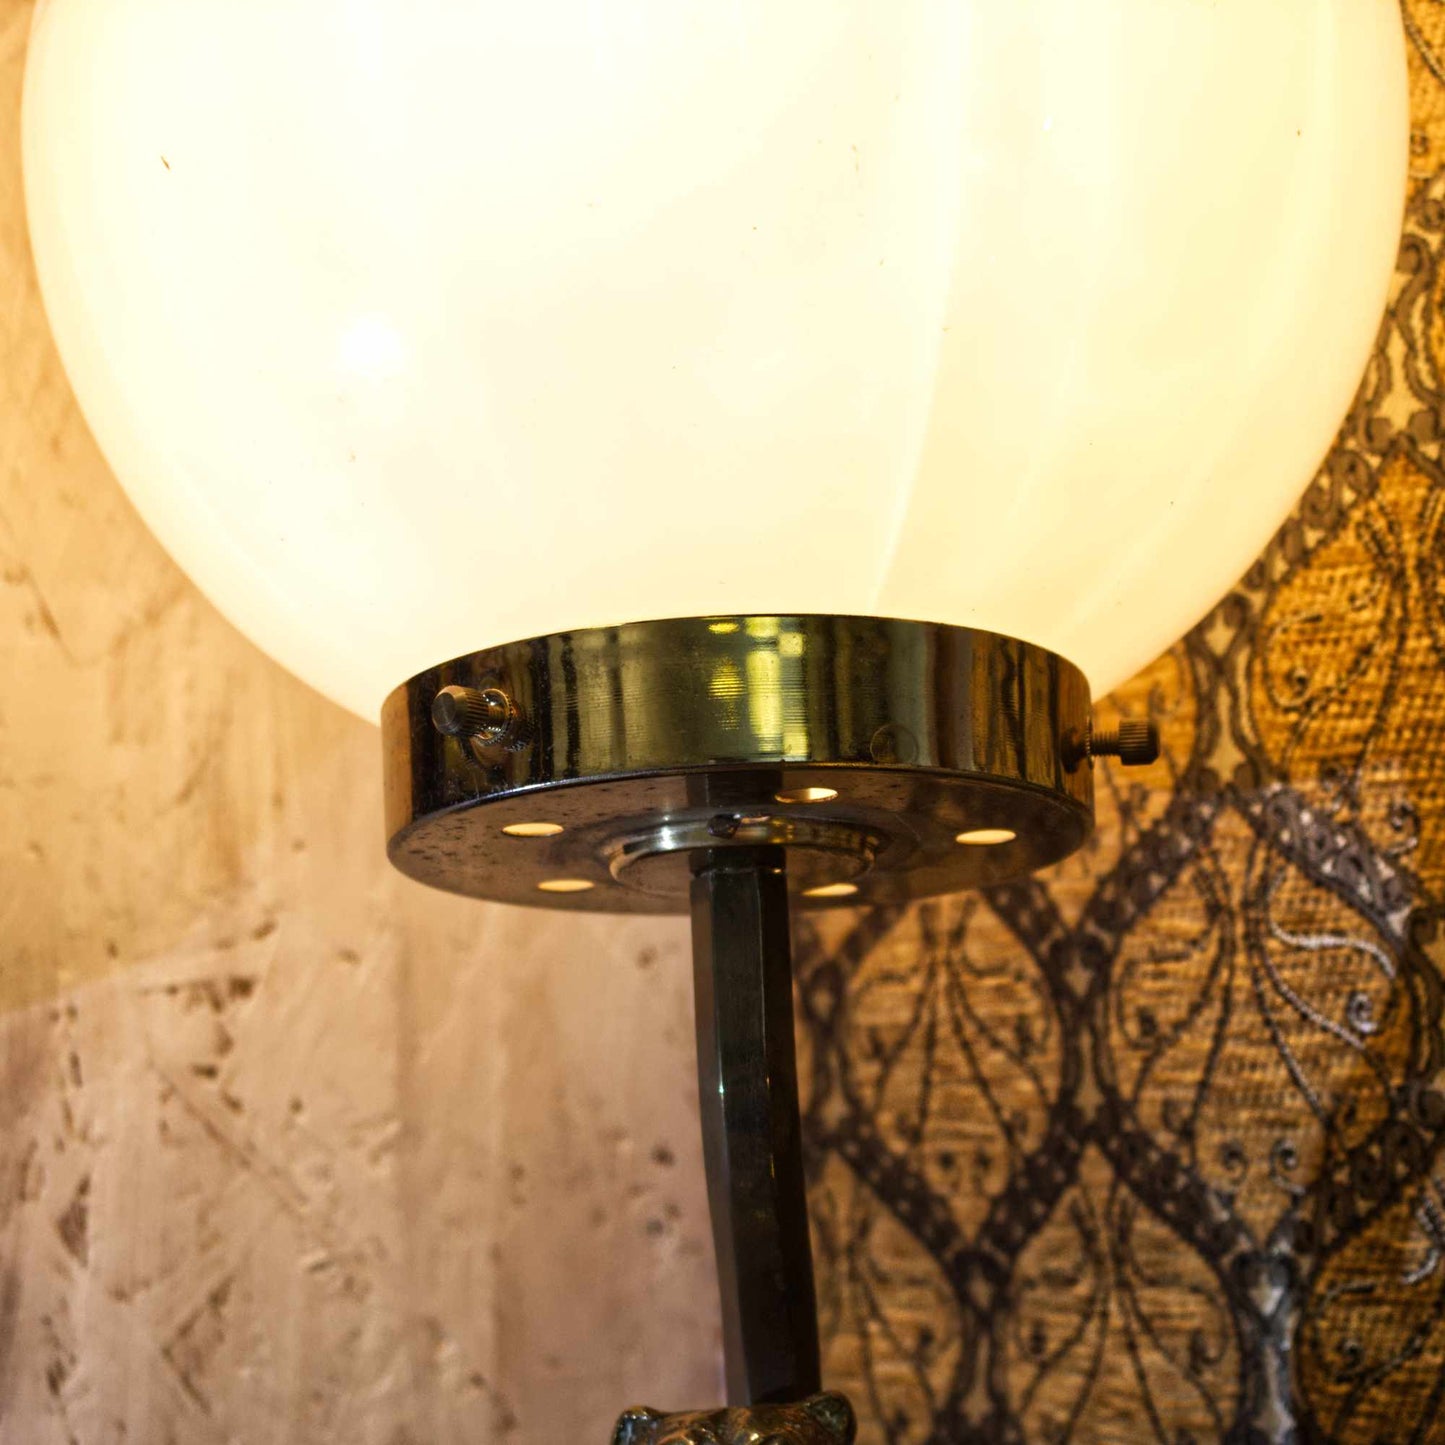 Vintage Brass Bear Table Lamp With Unusual Glass Dome Shade